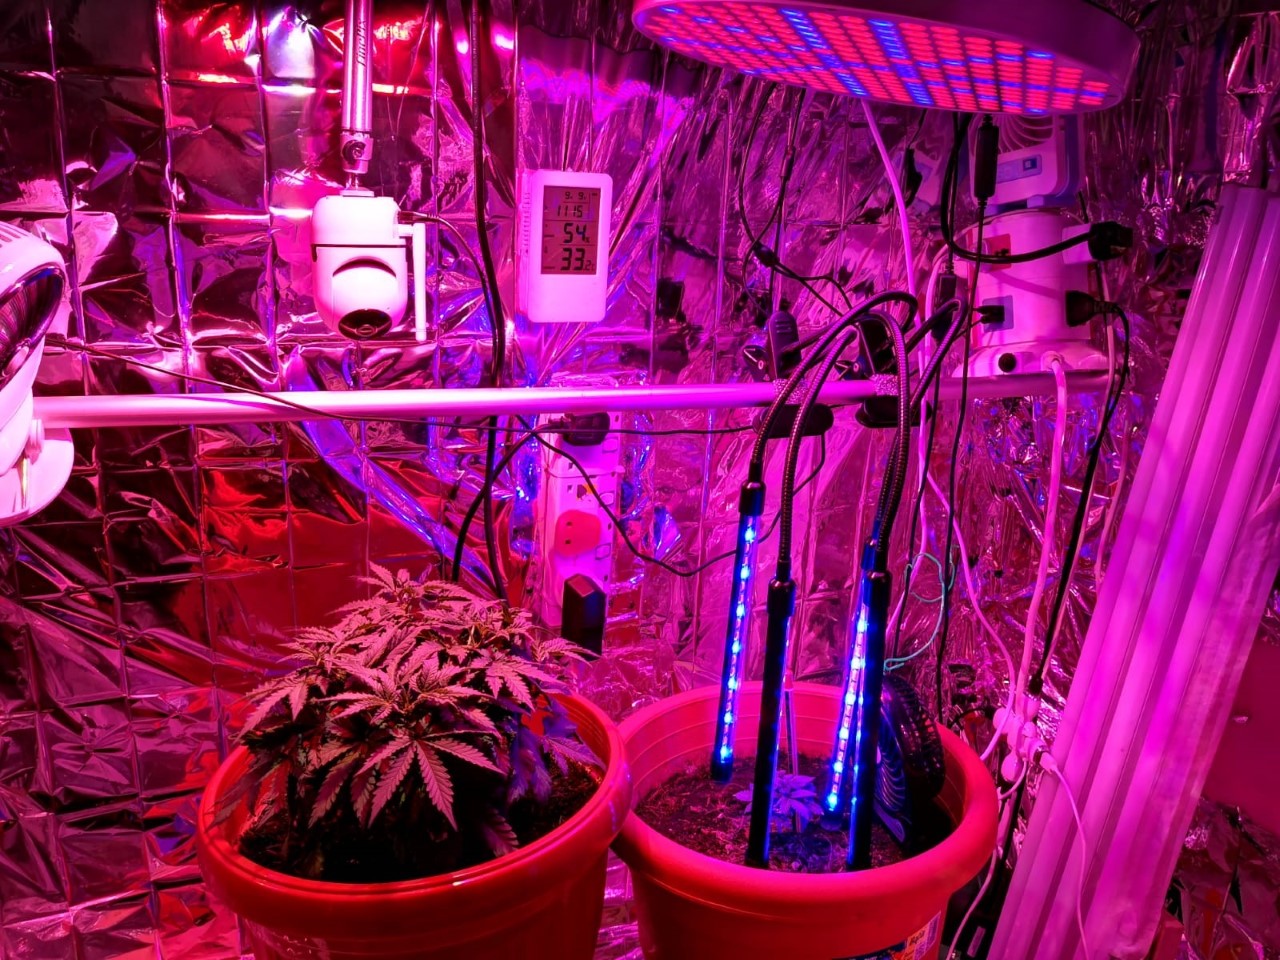 Photo-3 (CNB): View of interior of makeshift greenhouse, erected within a residential unit, raided by CNB on 9 September 2019.